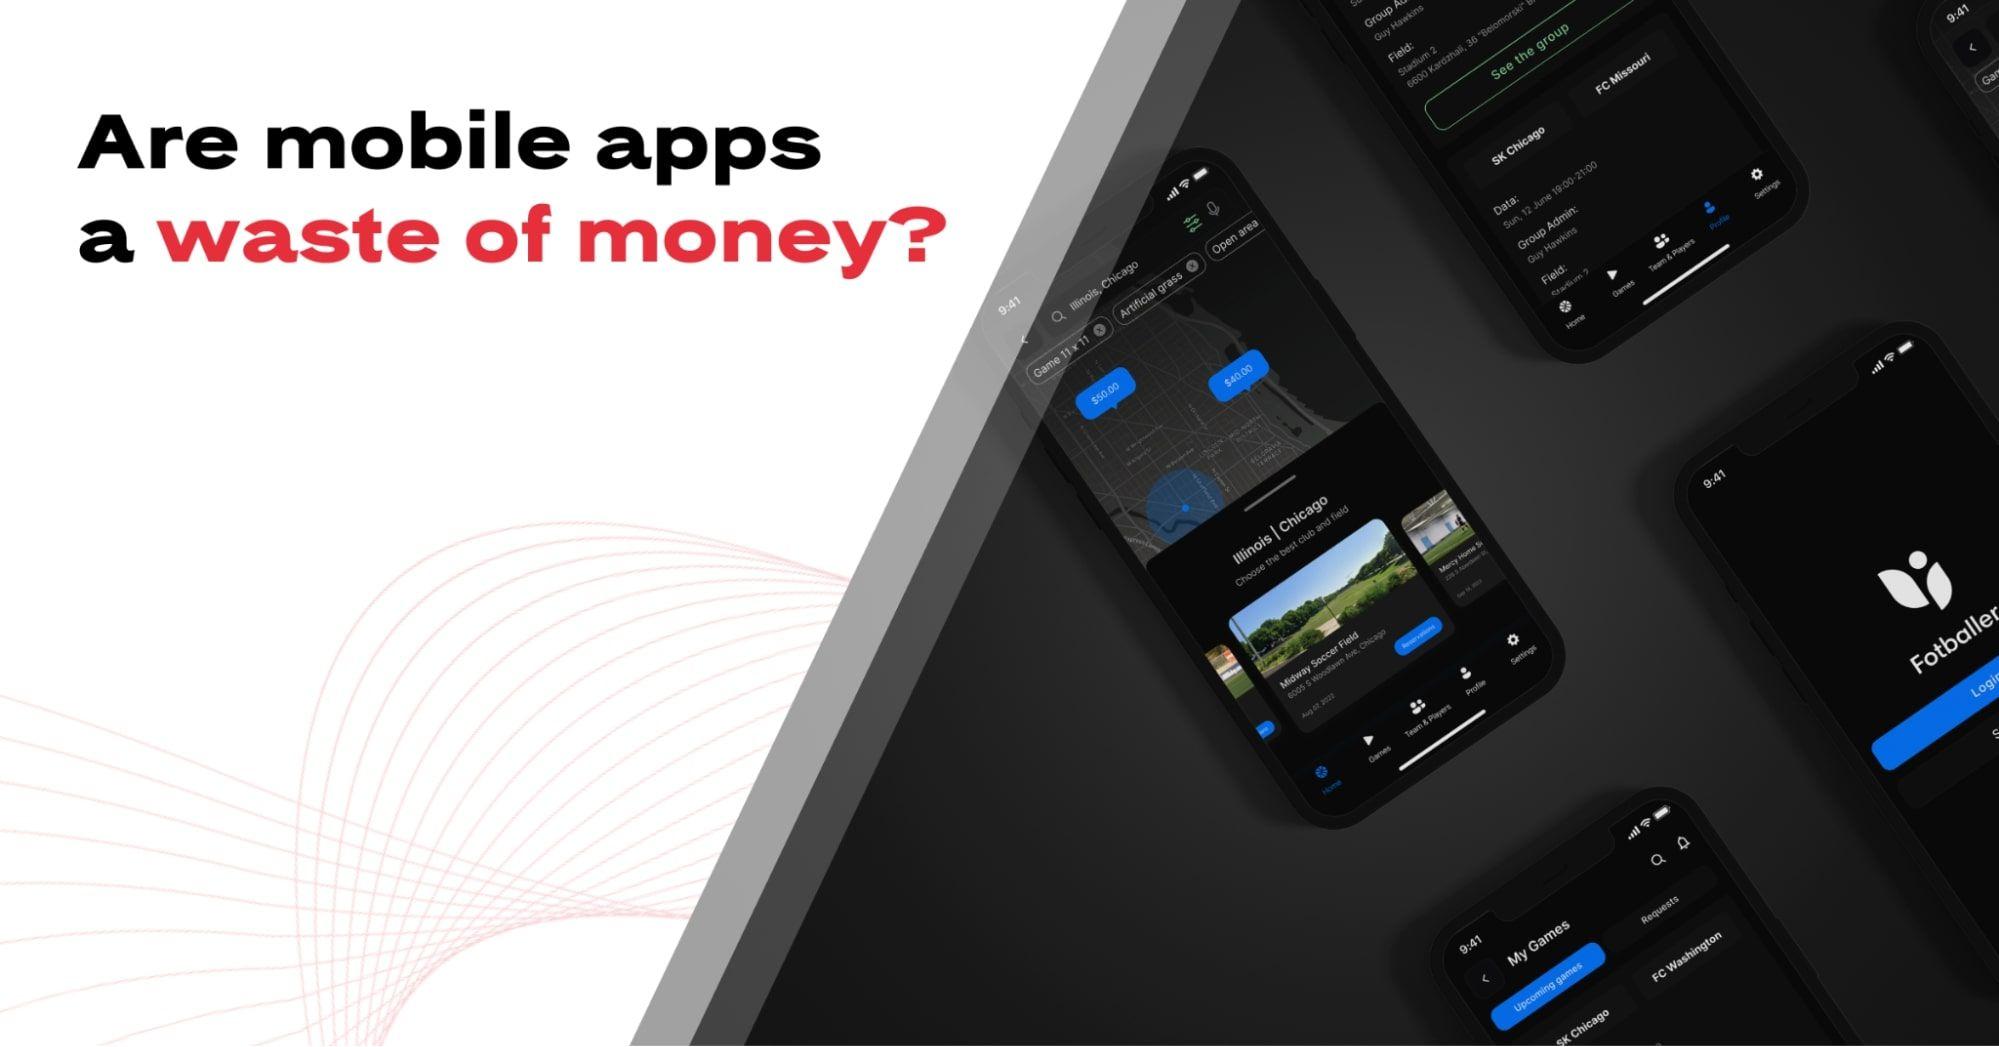 Are mobile apps a waste of money?